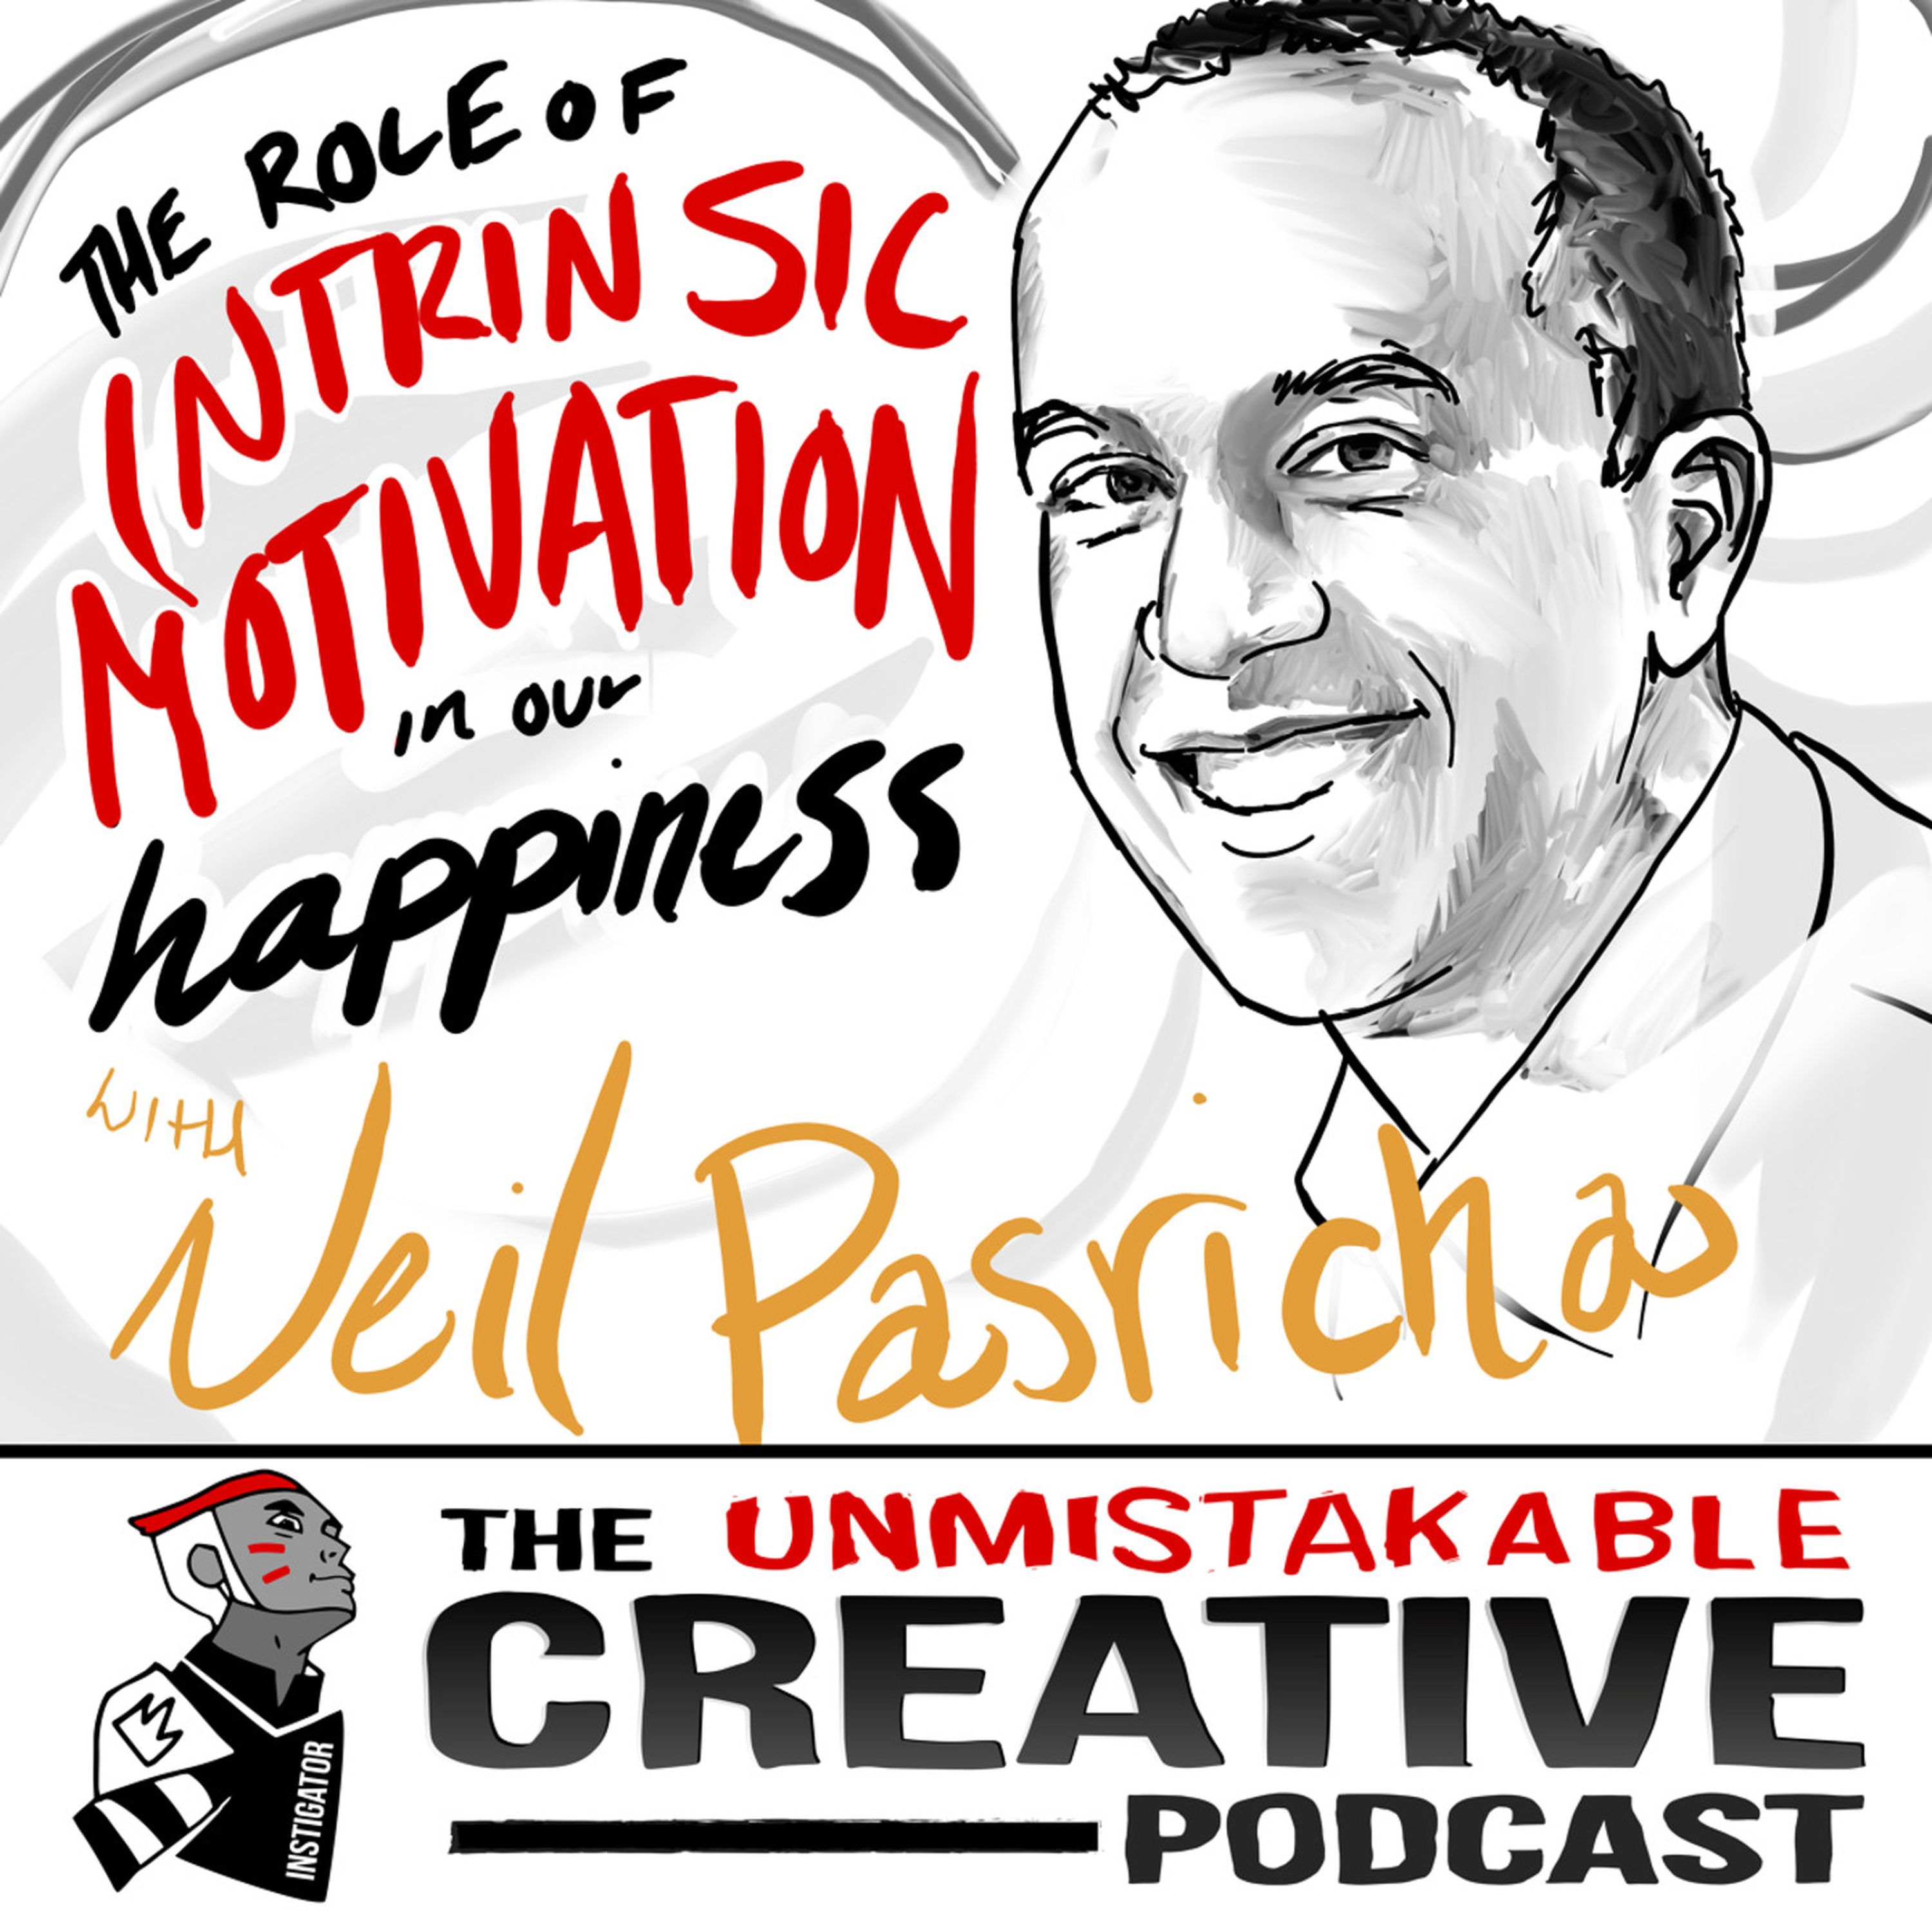 The Role of Intrinsic Motivation in Our Happiness with Neil Pasricha